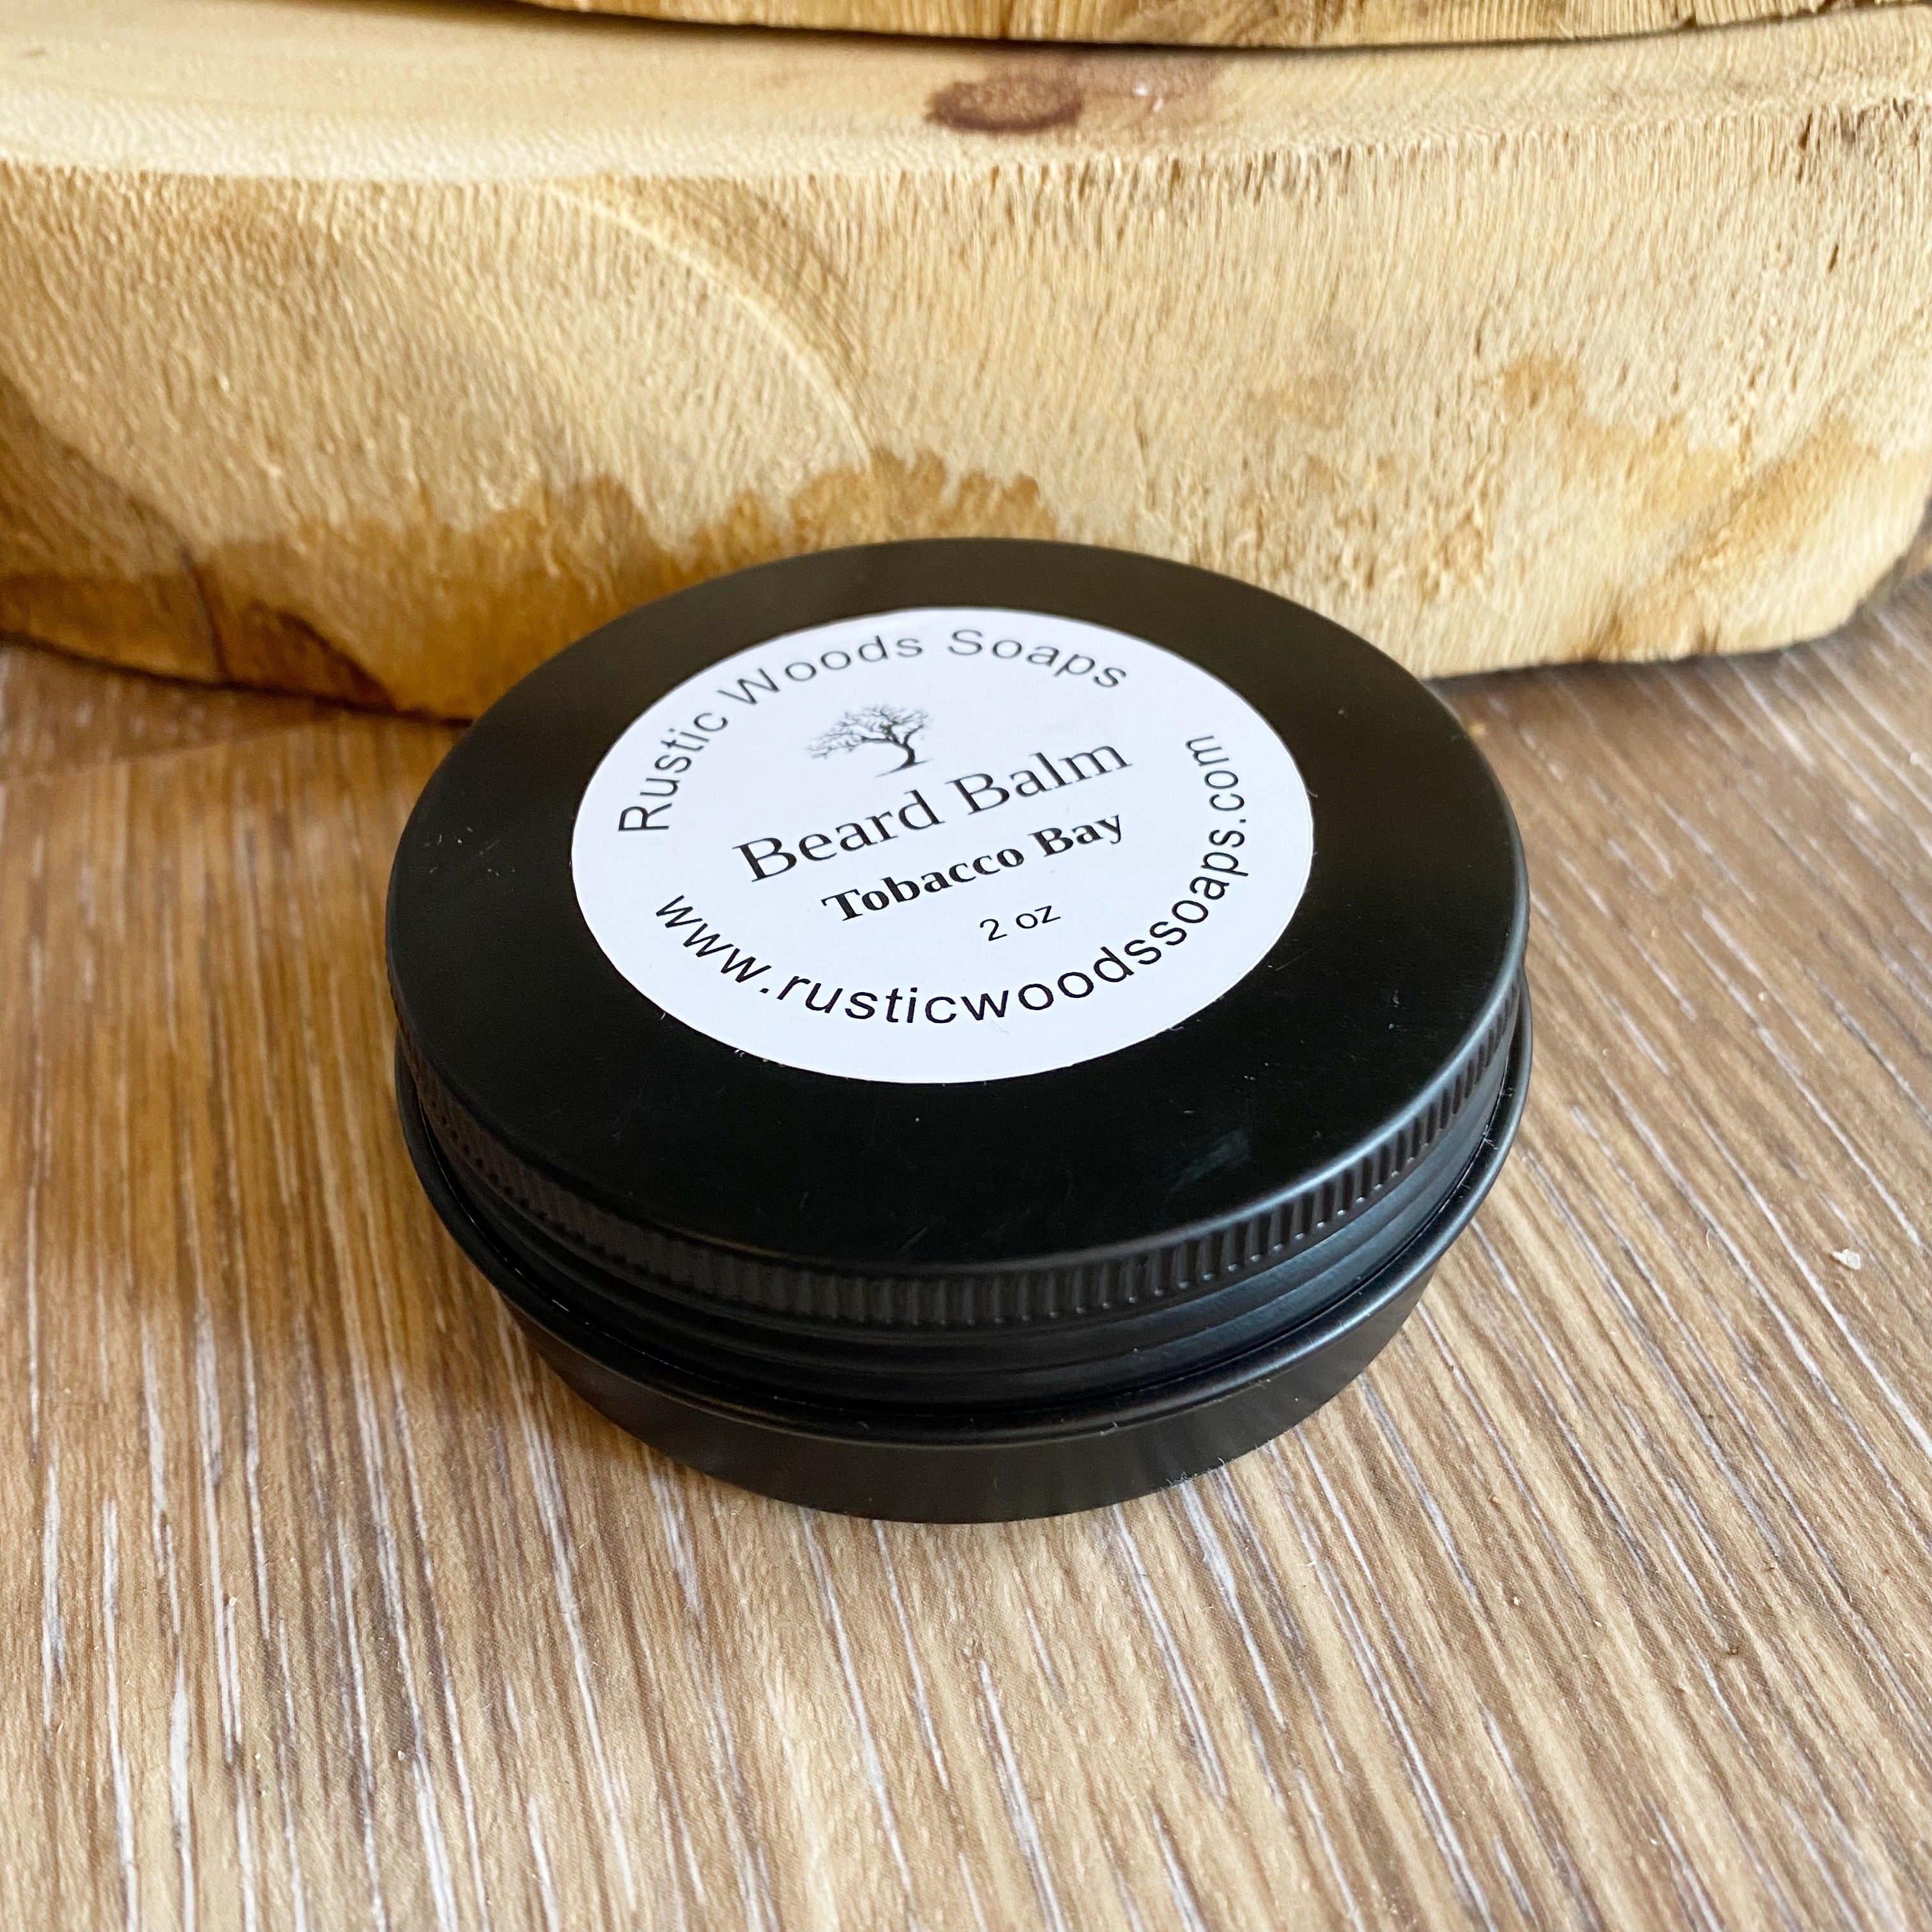 Black canister jar with white rustic woods soaps tobacco bay beard balm label lays on wood surface